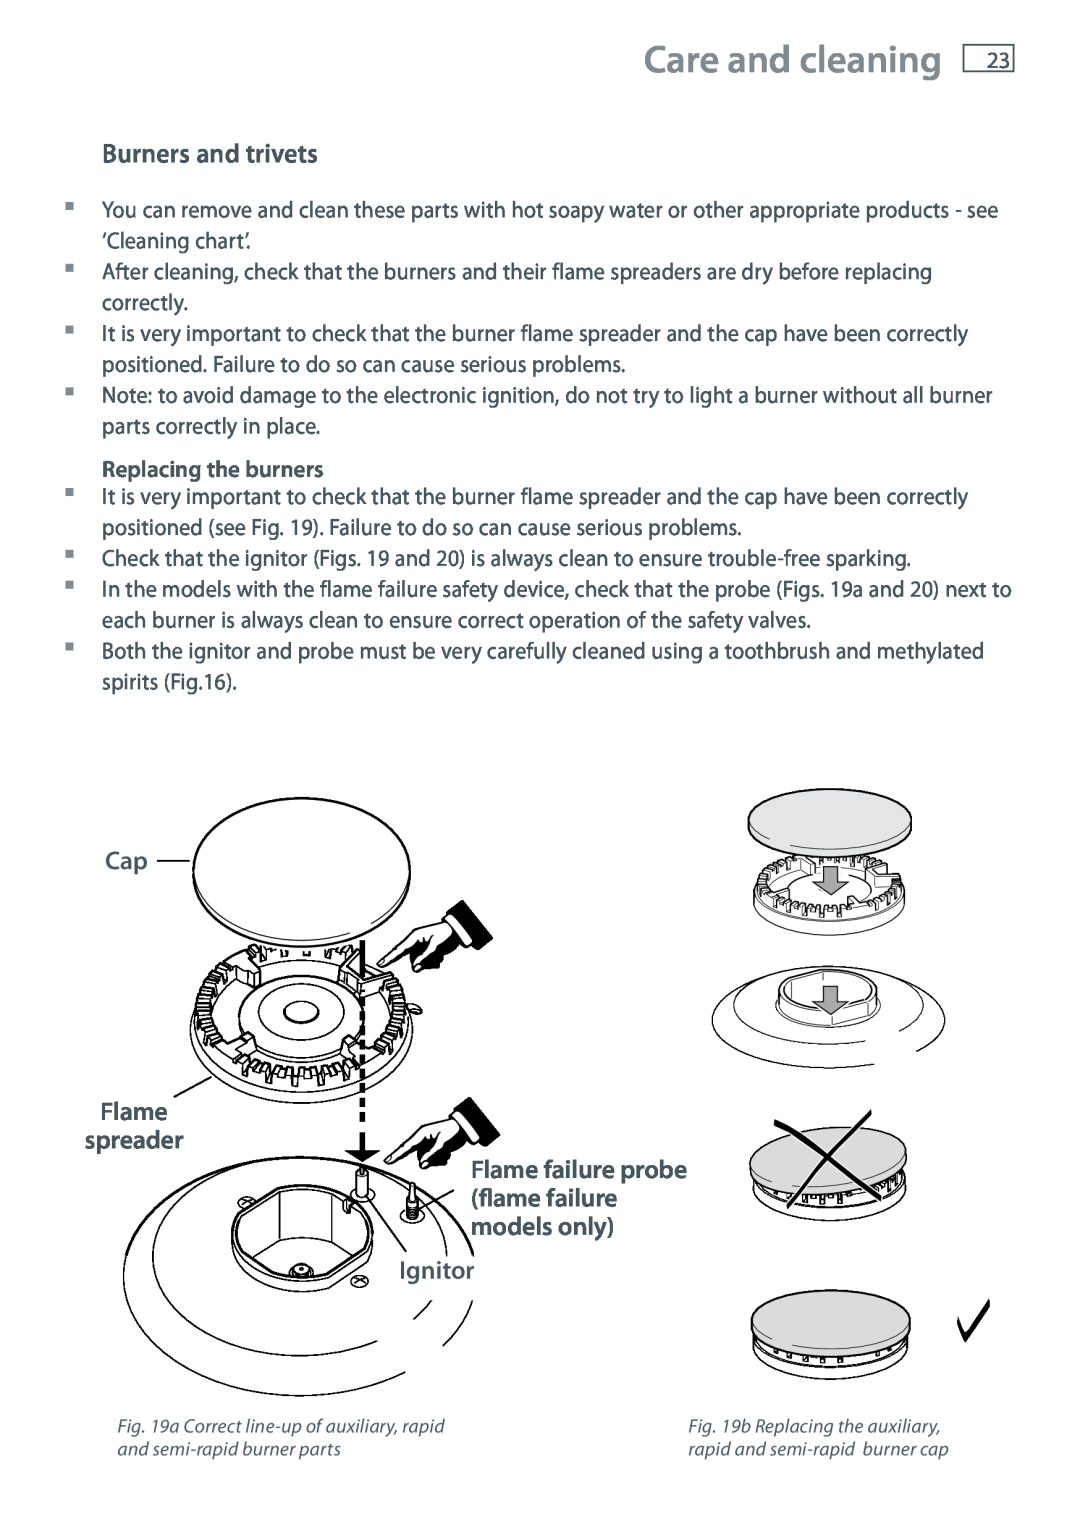 Fisher & Paykel CG604 installation instructions Burners and trivets, Cap Flame spreader, Ignitor, Care and cleaning 